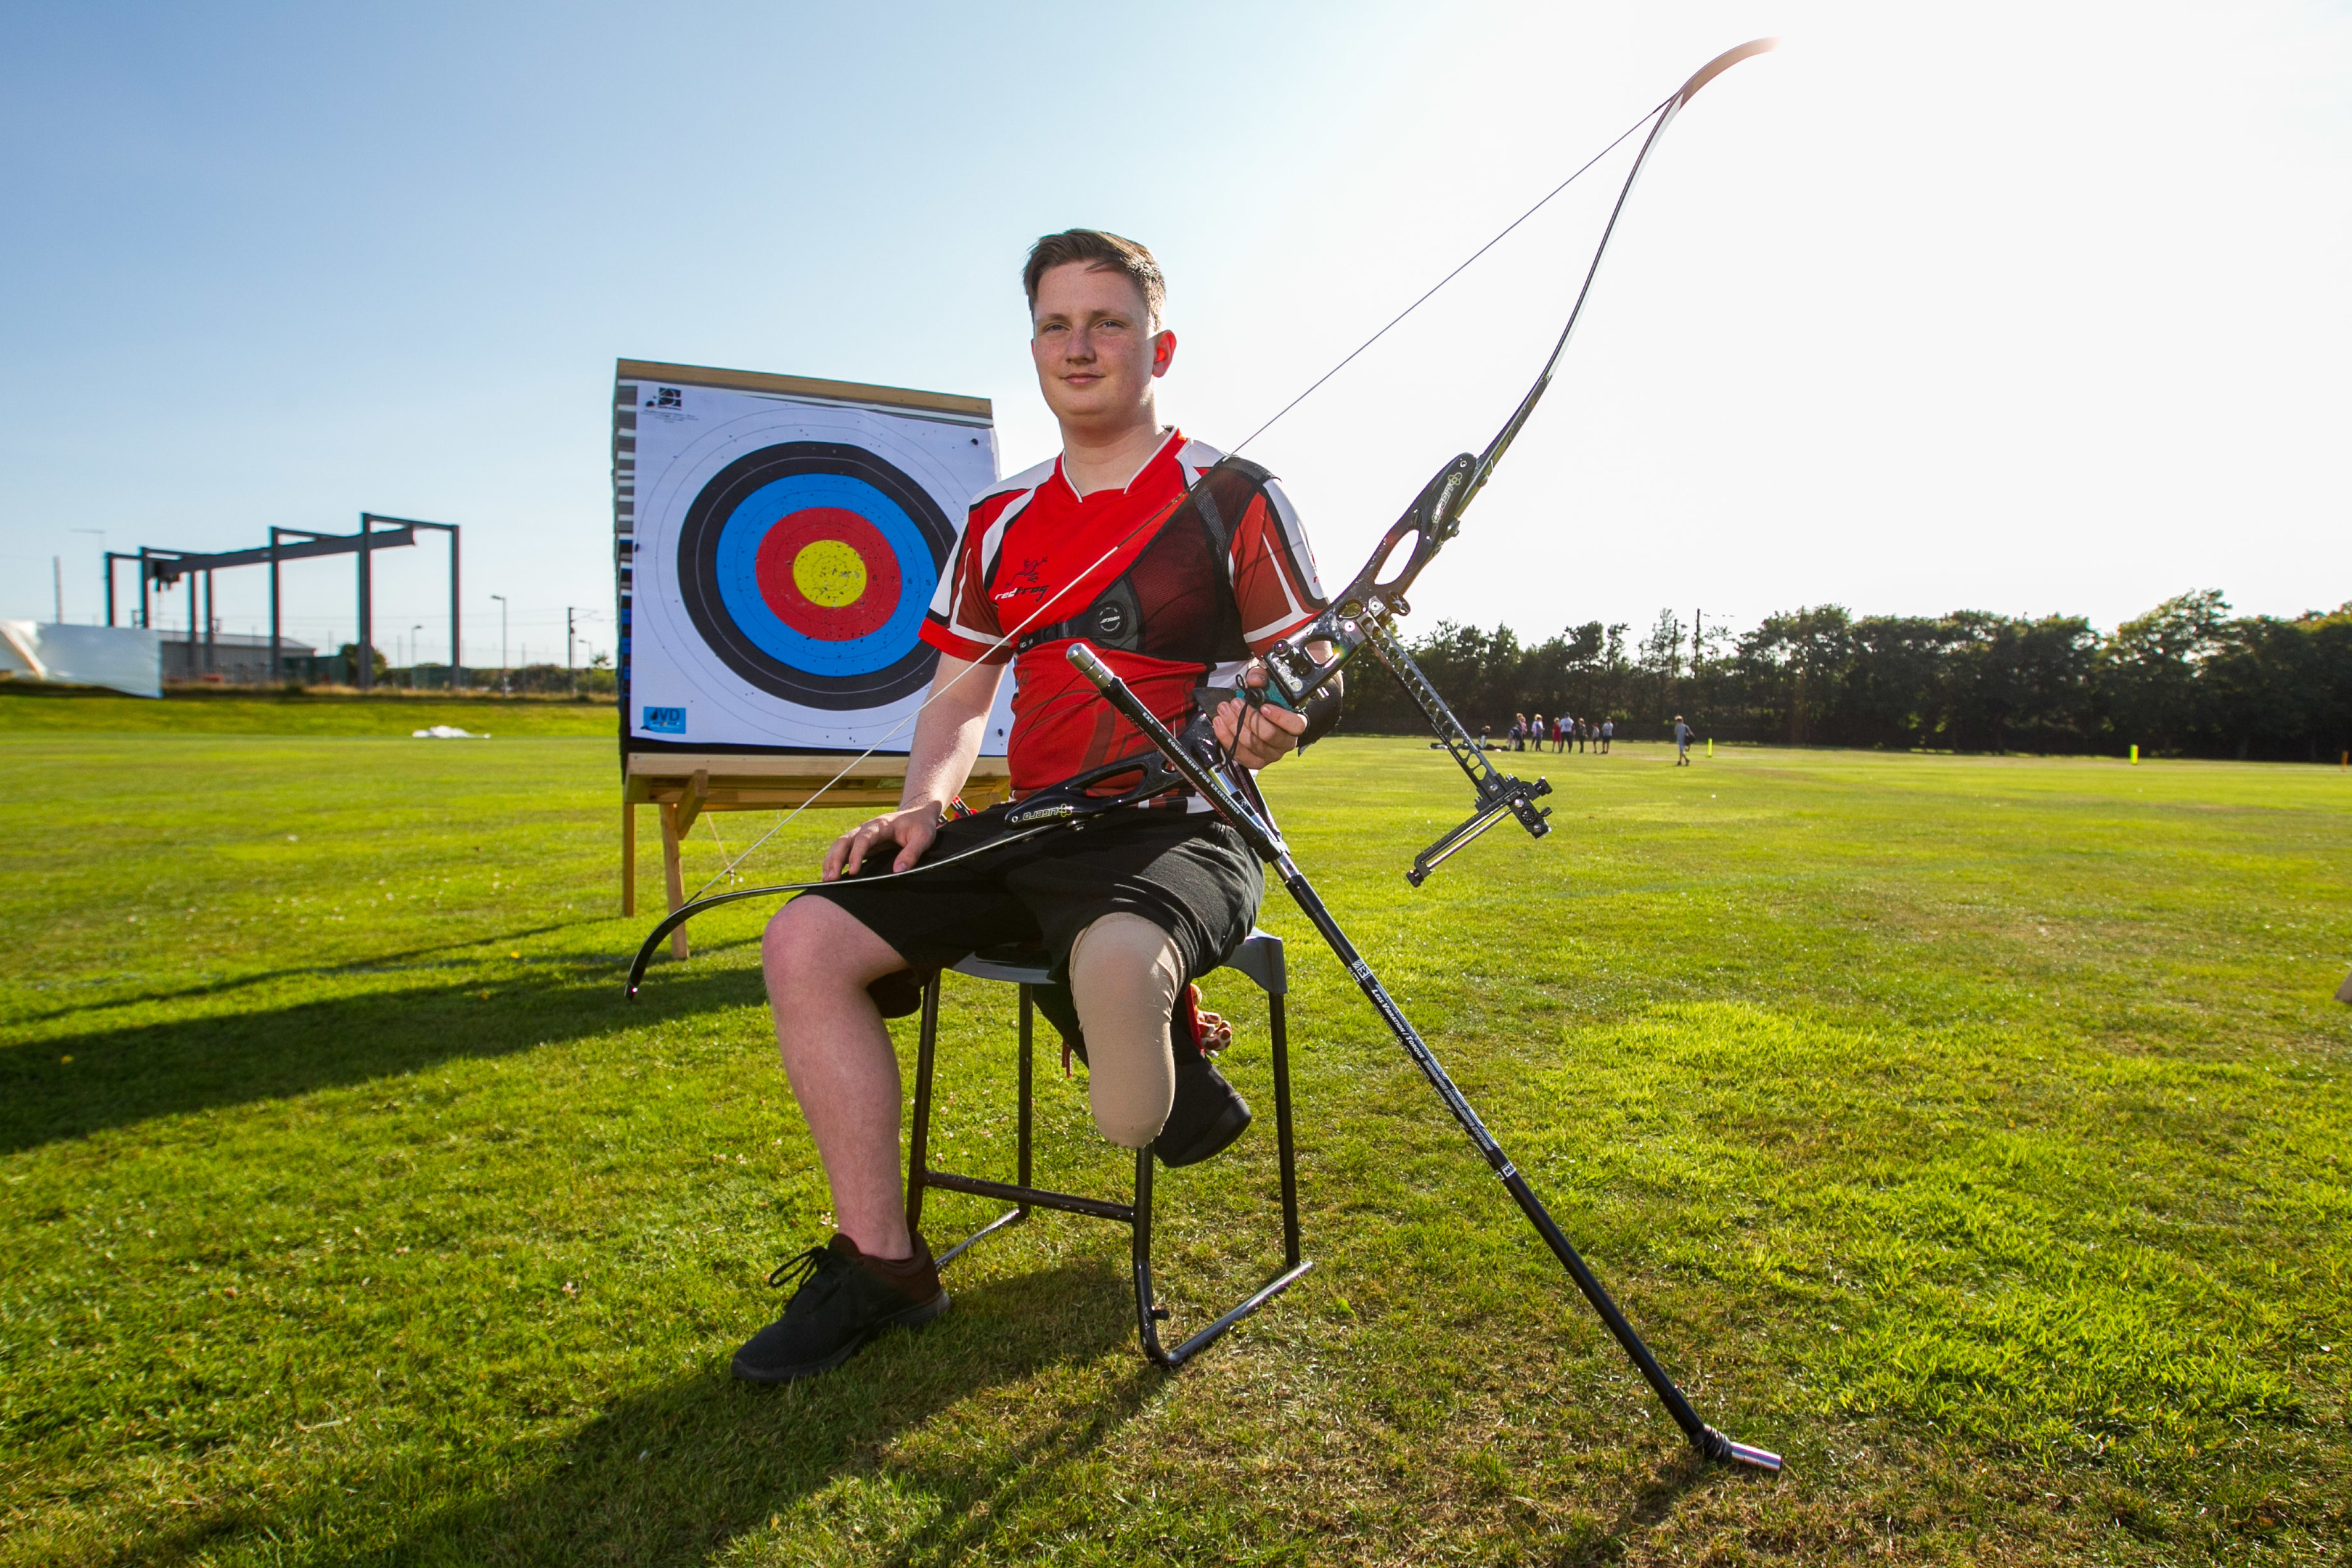 Cameron Radigan had cancer when he was very young, and although completely recovered, his leg became progressively useless. So he persuaded doctors to amputate it. He is determined to live life to the full and is a national level archer.